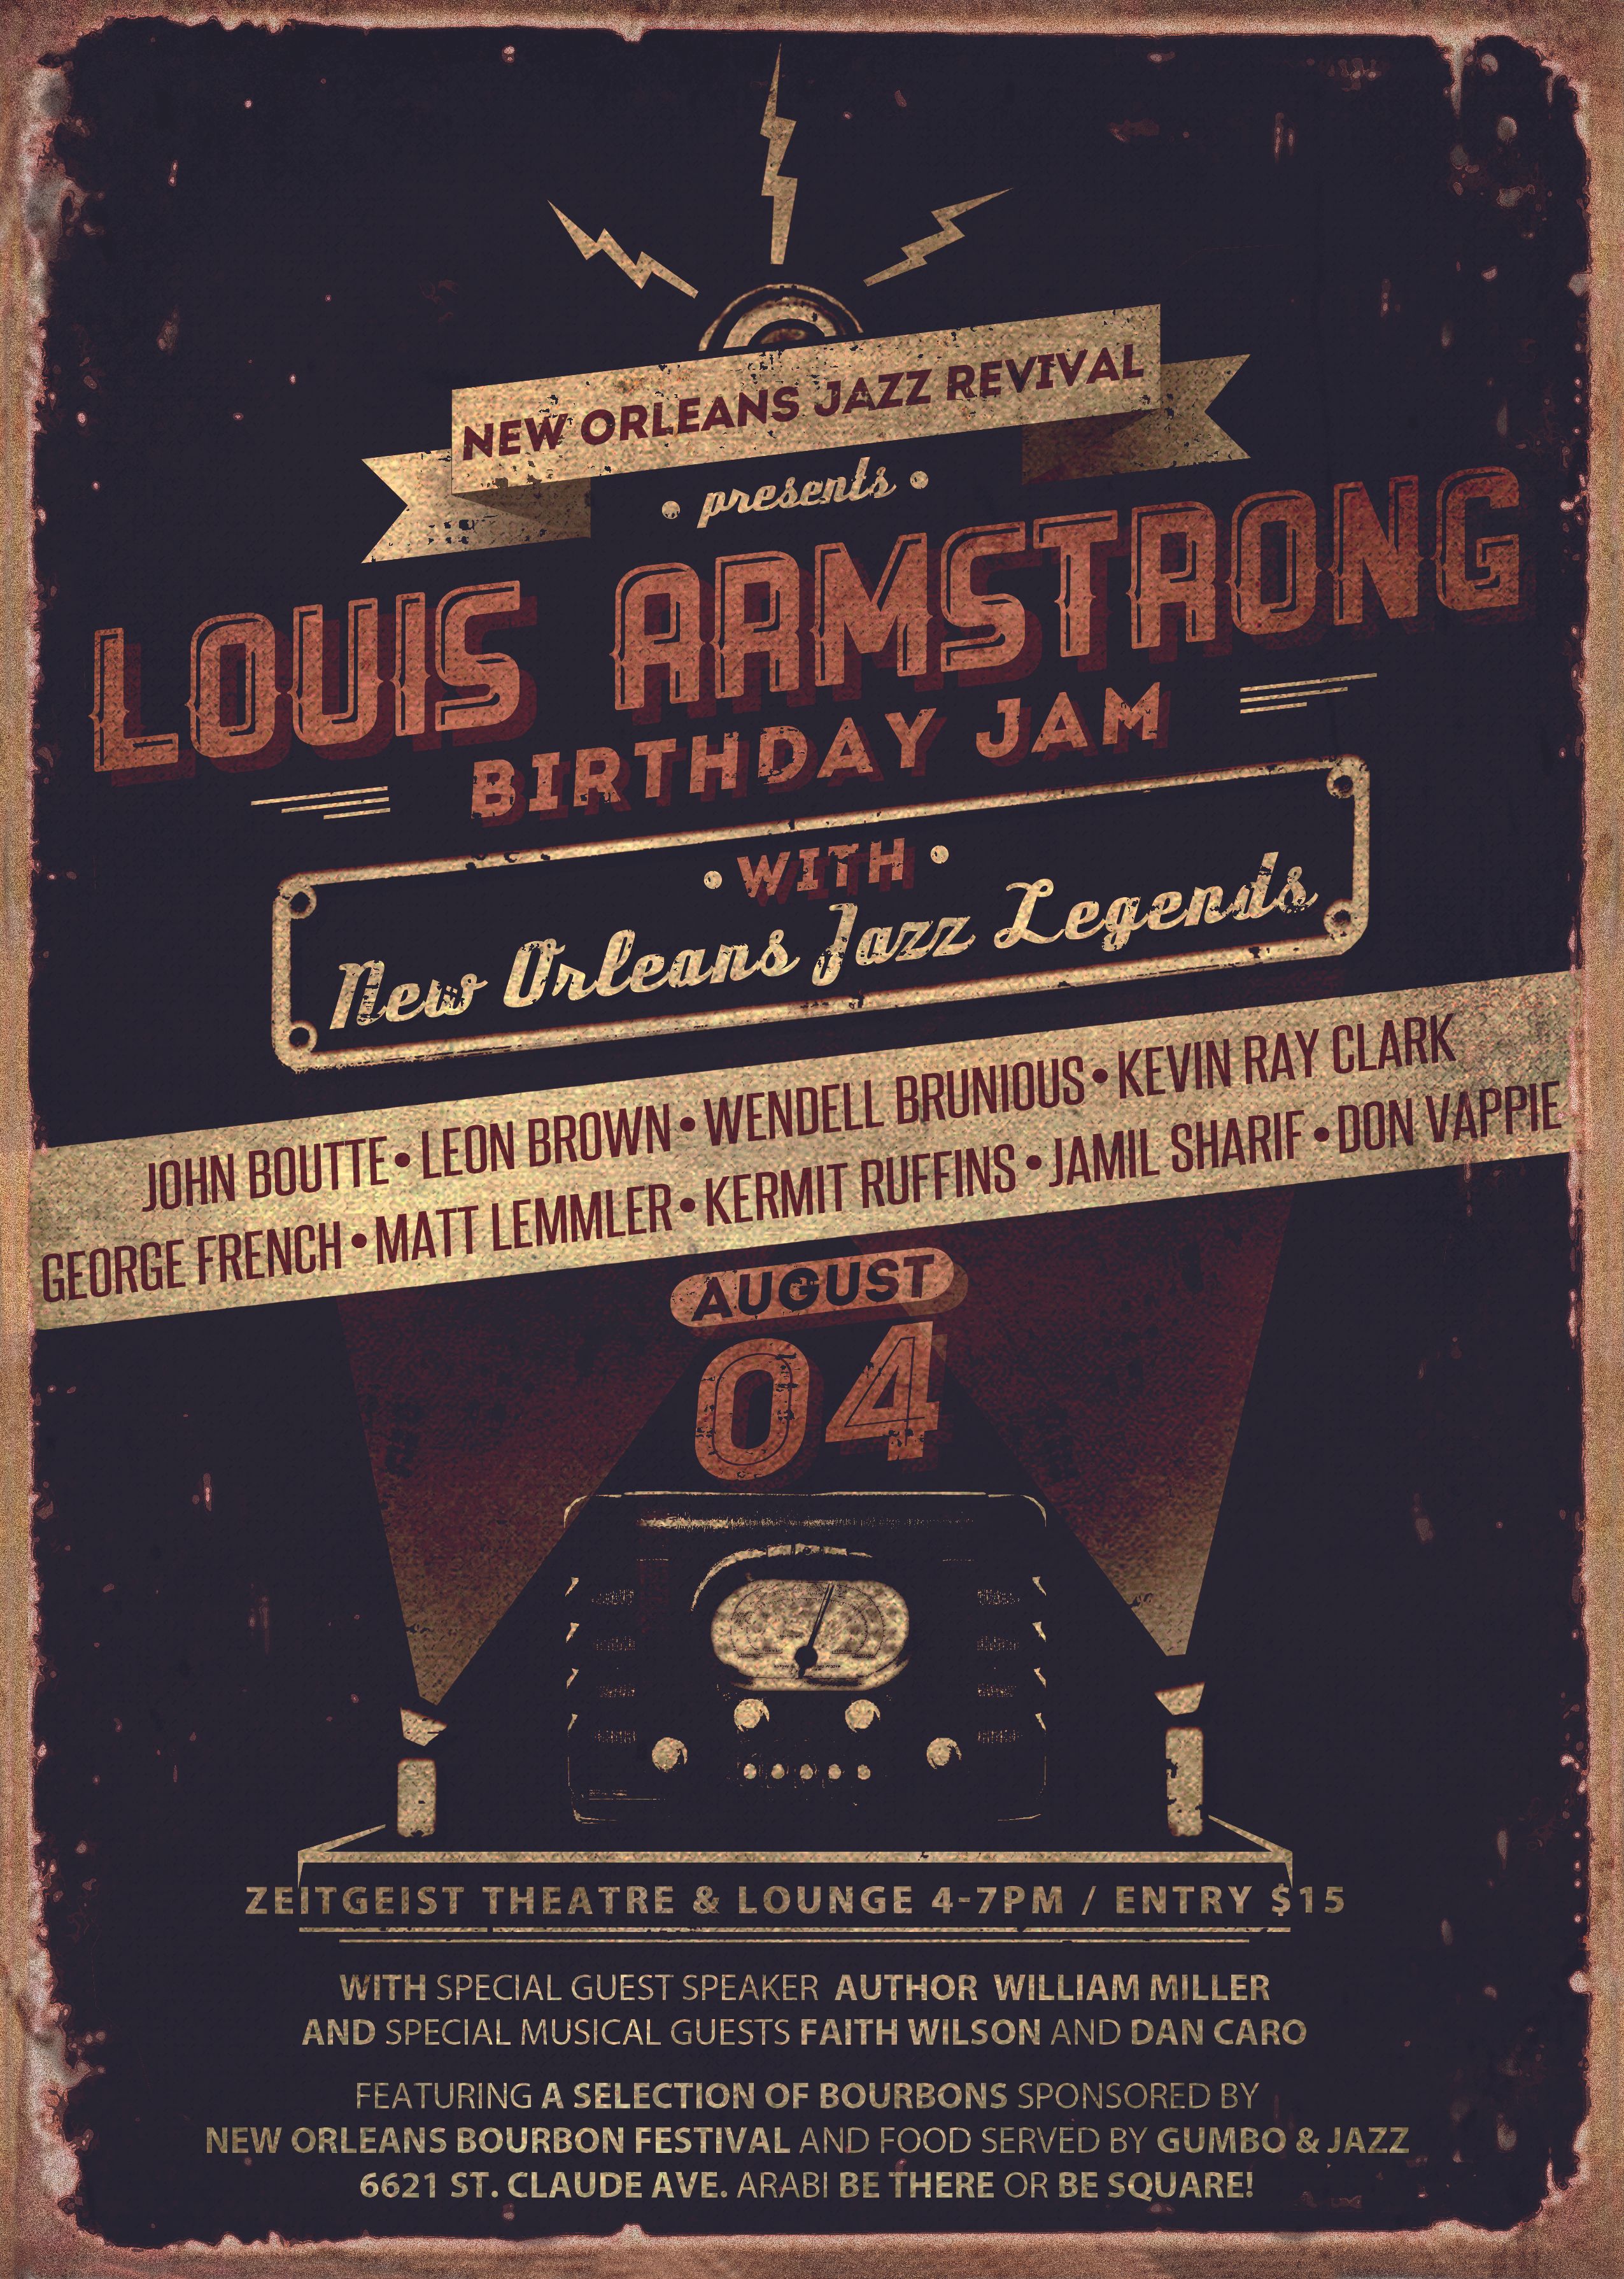 Celebrating ‪Louis Armstrong‬’s Birthday, ‪August 4th‬, with New Orleans Local Jazz Legends



‪Louis Armstrong Birthday Jam-Bourbon Tasting/Free Red Beans‬
‪Sunday, August 4th 4-7pm‬
 With John Boutte, Kermit Ruffins, Wendell Brunious, George French, Leon Brown, Kevin Ray Clark, Matt Lemmler, Jamil Sharif, Don Vappie

And special guest author William Miller along with Dan Caro, Faith Wilson
Bourbon Tasting from New Orleans Bourbon Festival and food served by Gumbo and Jazz
Zeitgeist Theatre and Lounge 
‪6621 St Claude Ave, Arabi, LA‬

$15 entry